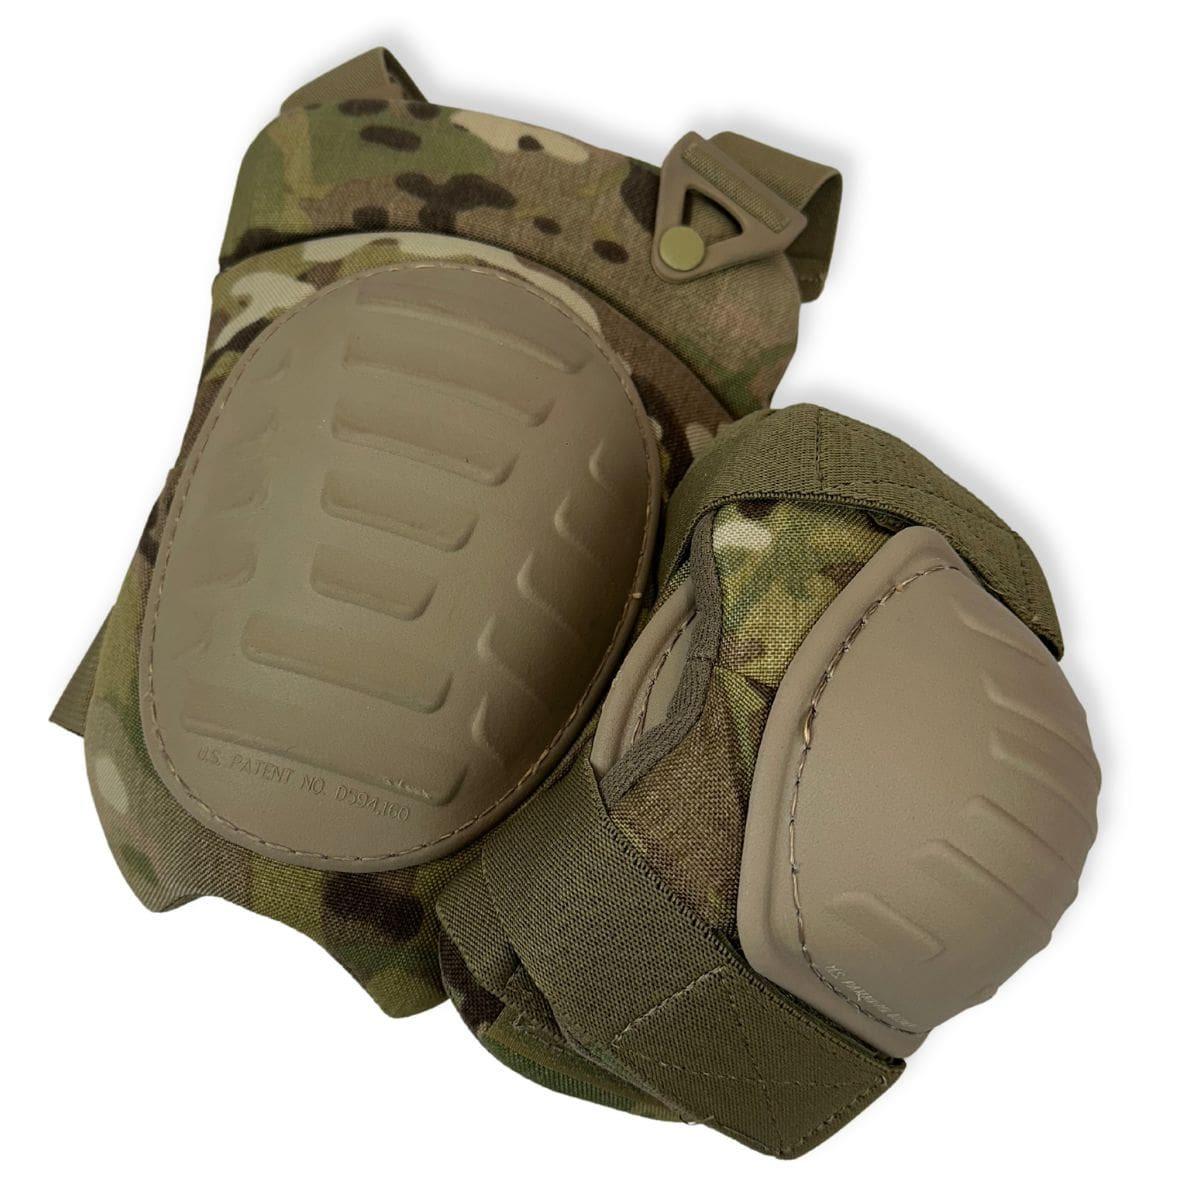 Image of U.S. Issue OCP Multicam Knee and Elbow Pad Set, New